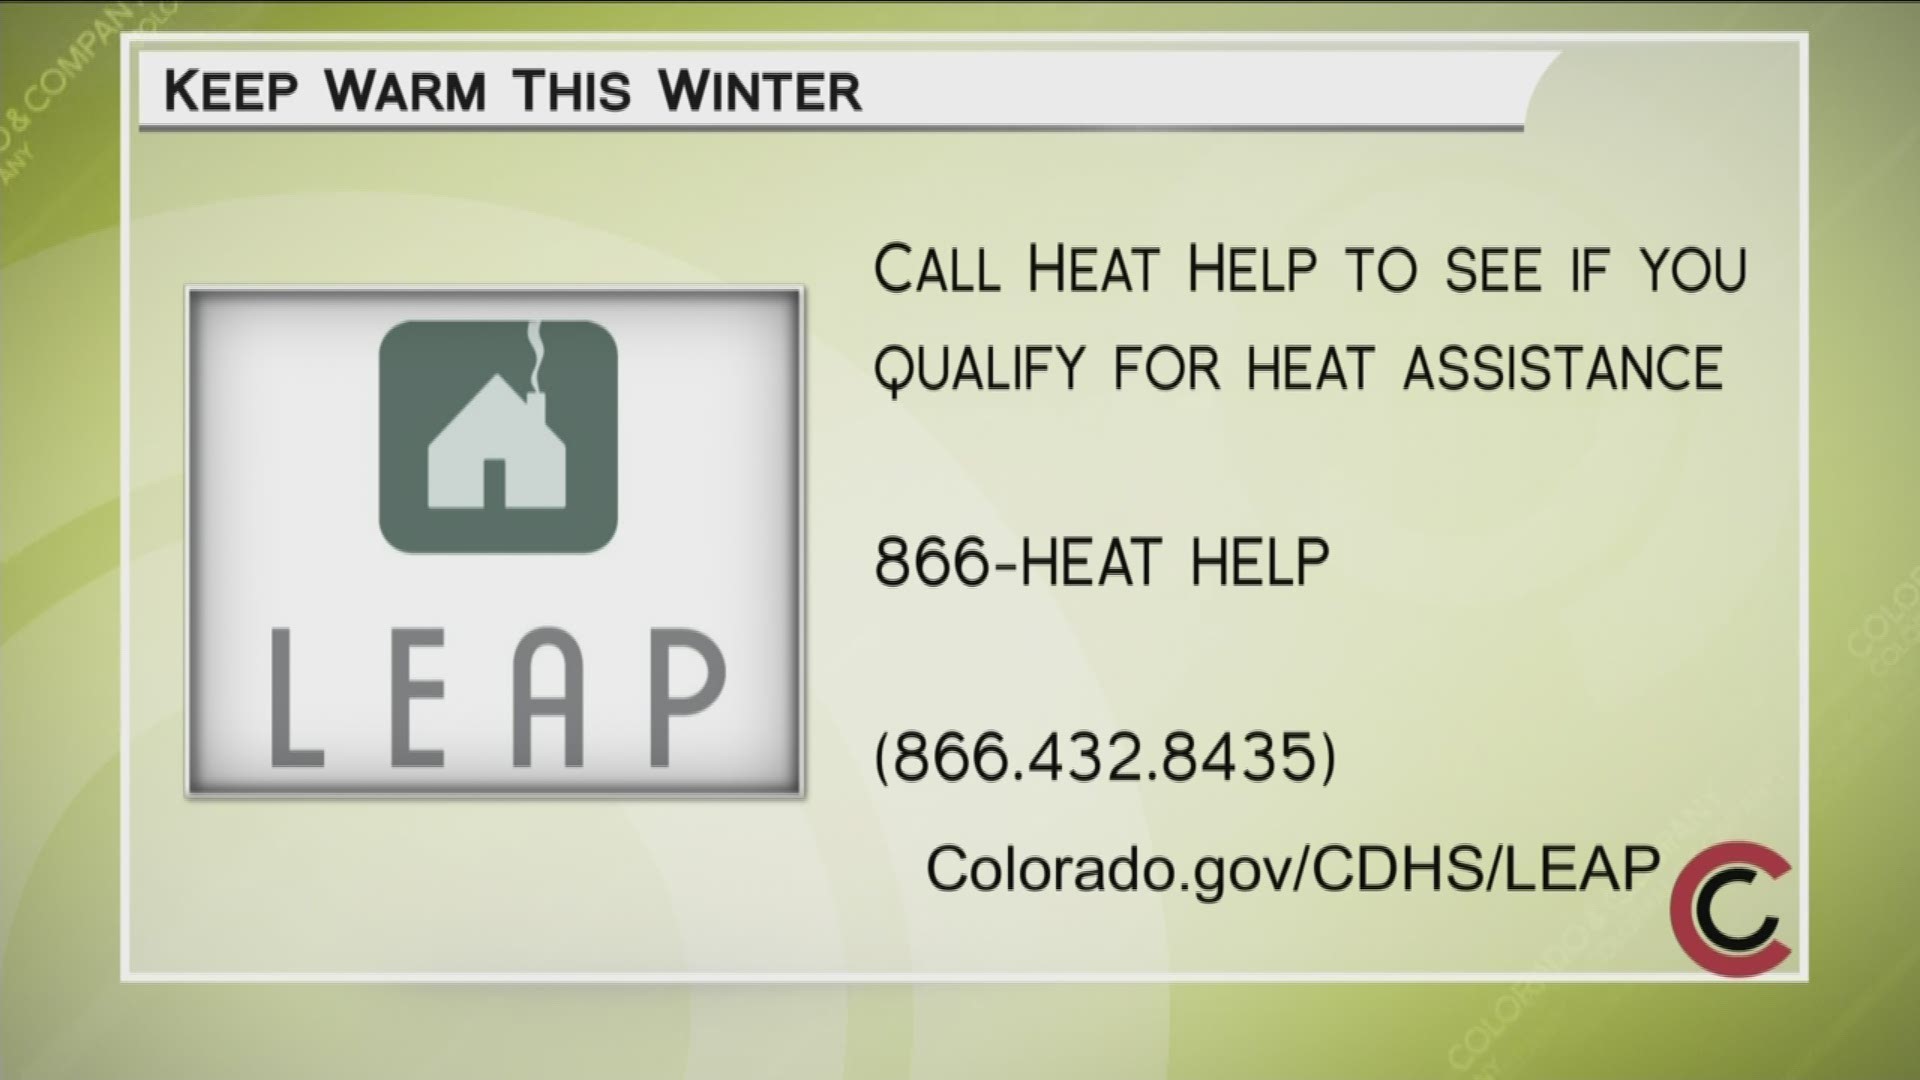 Get assistance keeping the heat on during Colorado's cold months. Find out if LEAP can help you by calling 866.432.8435 or visit Colorado.gov/CDHS/LEAP.